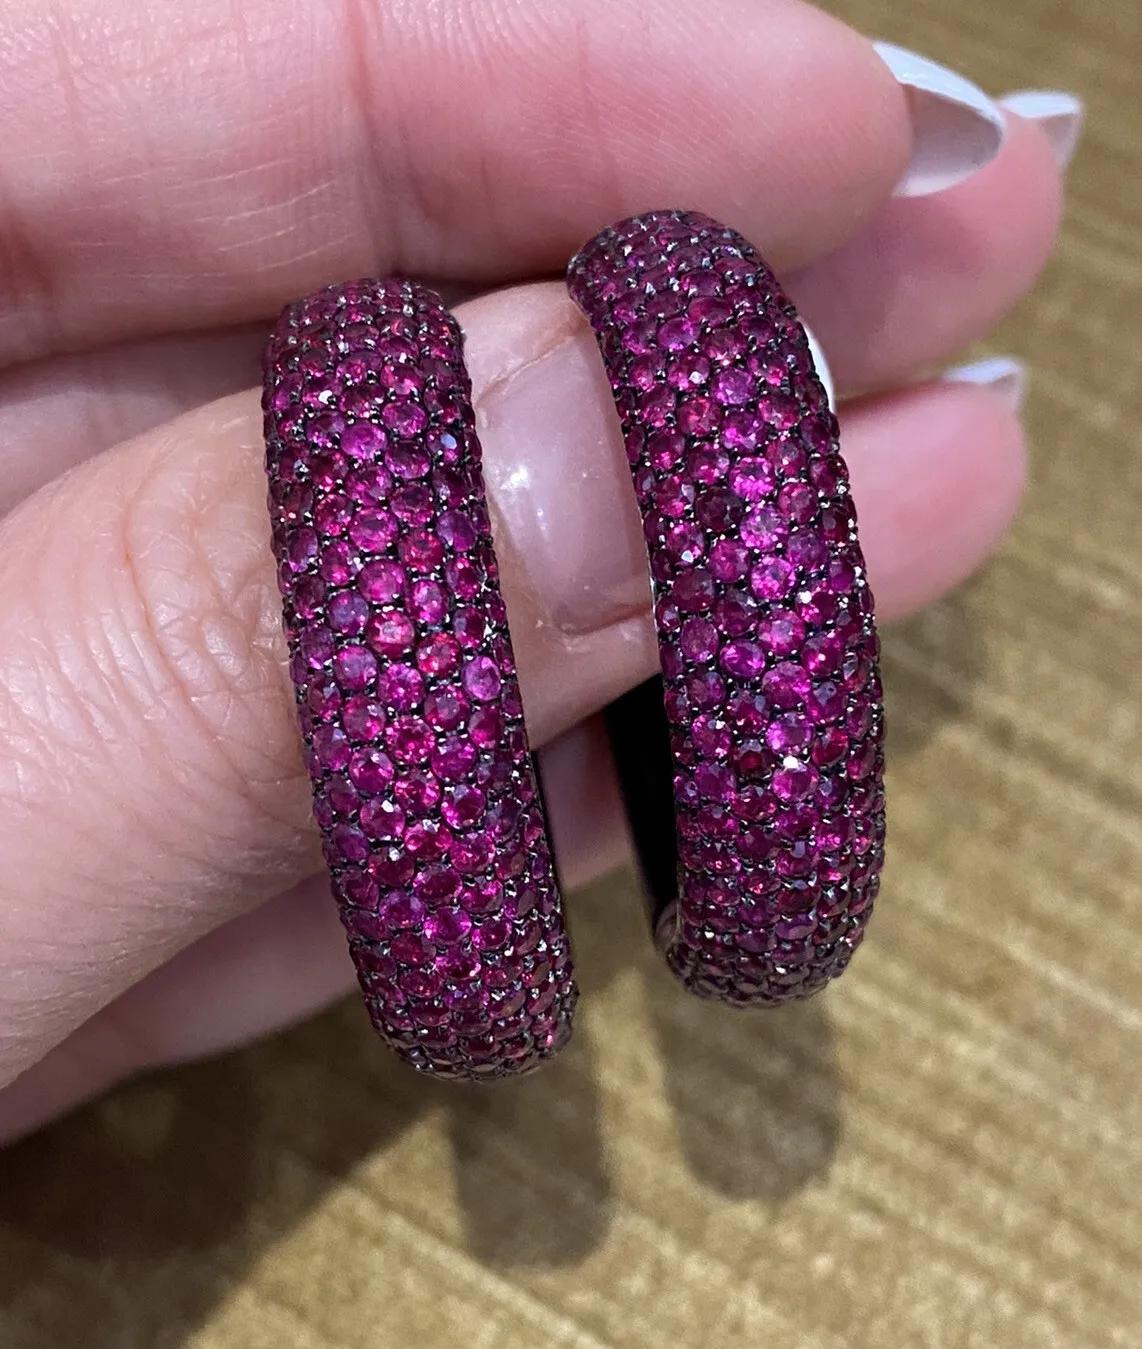 Wide Pave Ruby and Onyx Round Hoop Earrings in 18k White Gold

Ruby and Onyx Hoop Earrings feature 7.00 carats of deep pinkish-red Round Rubies pavè set in 7 rows on the front half of the earring, with Black Onyx on the back part of the earring, all